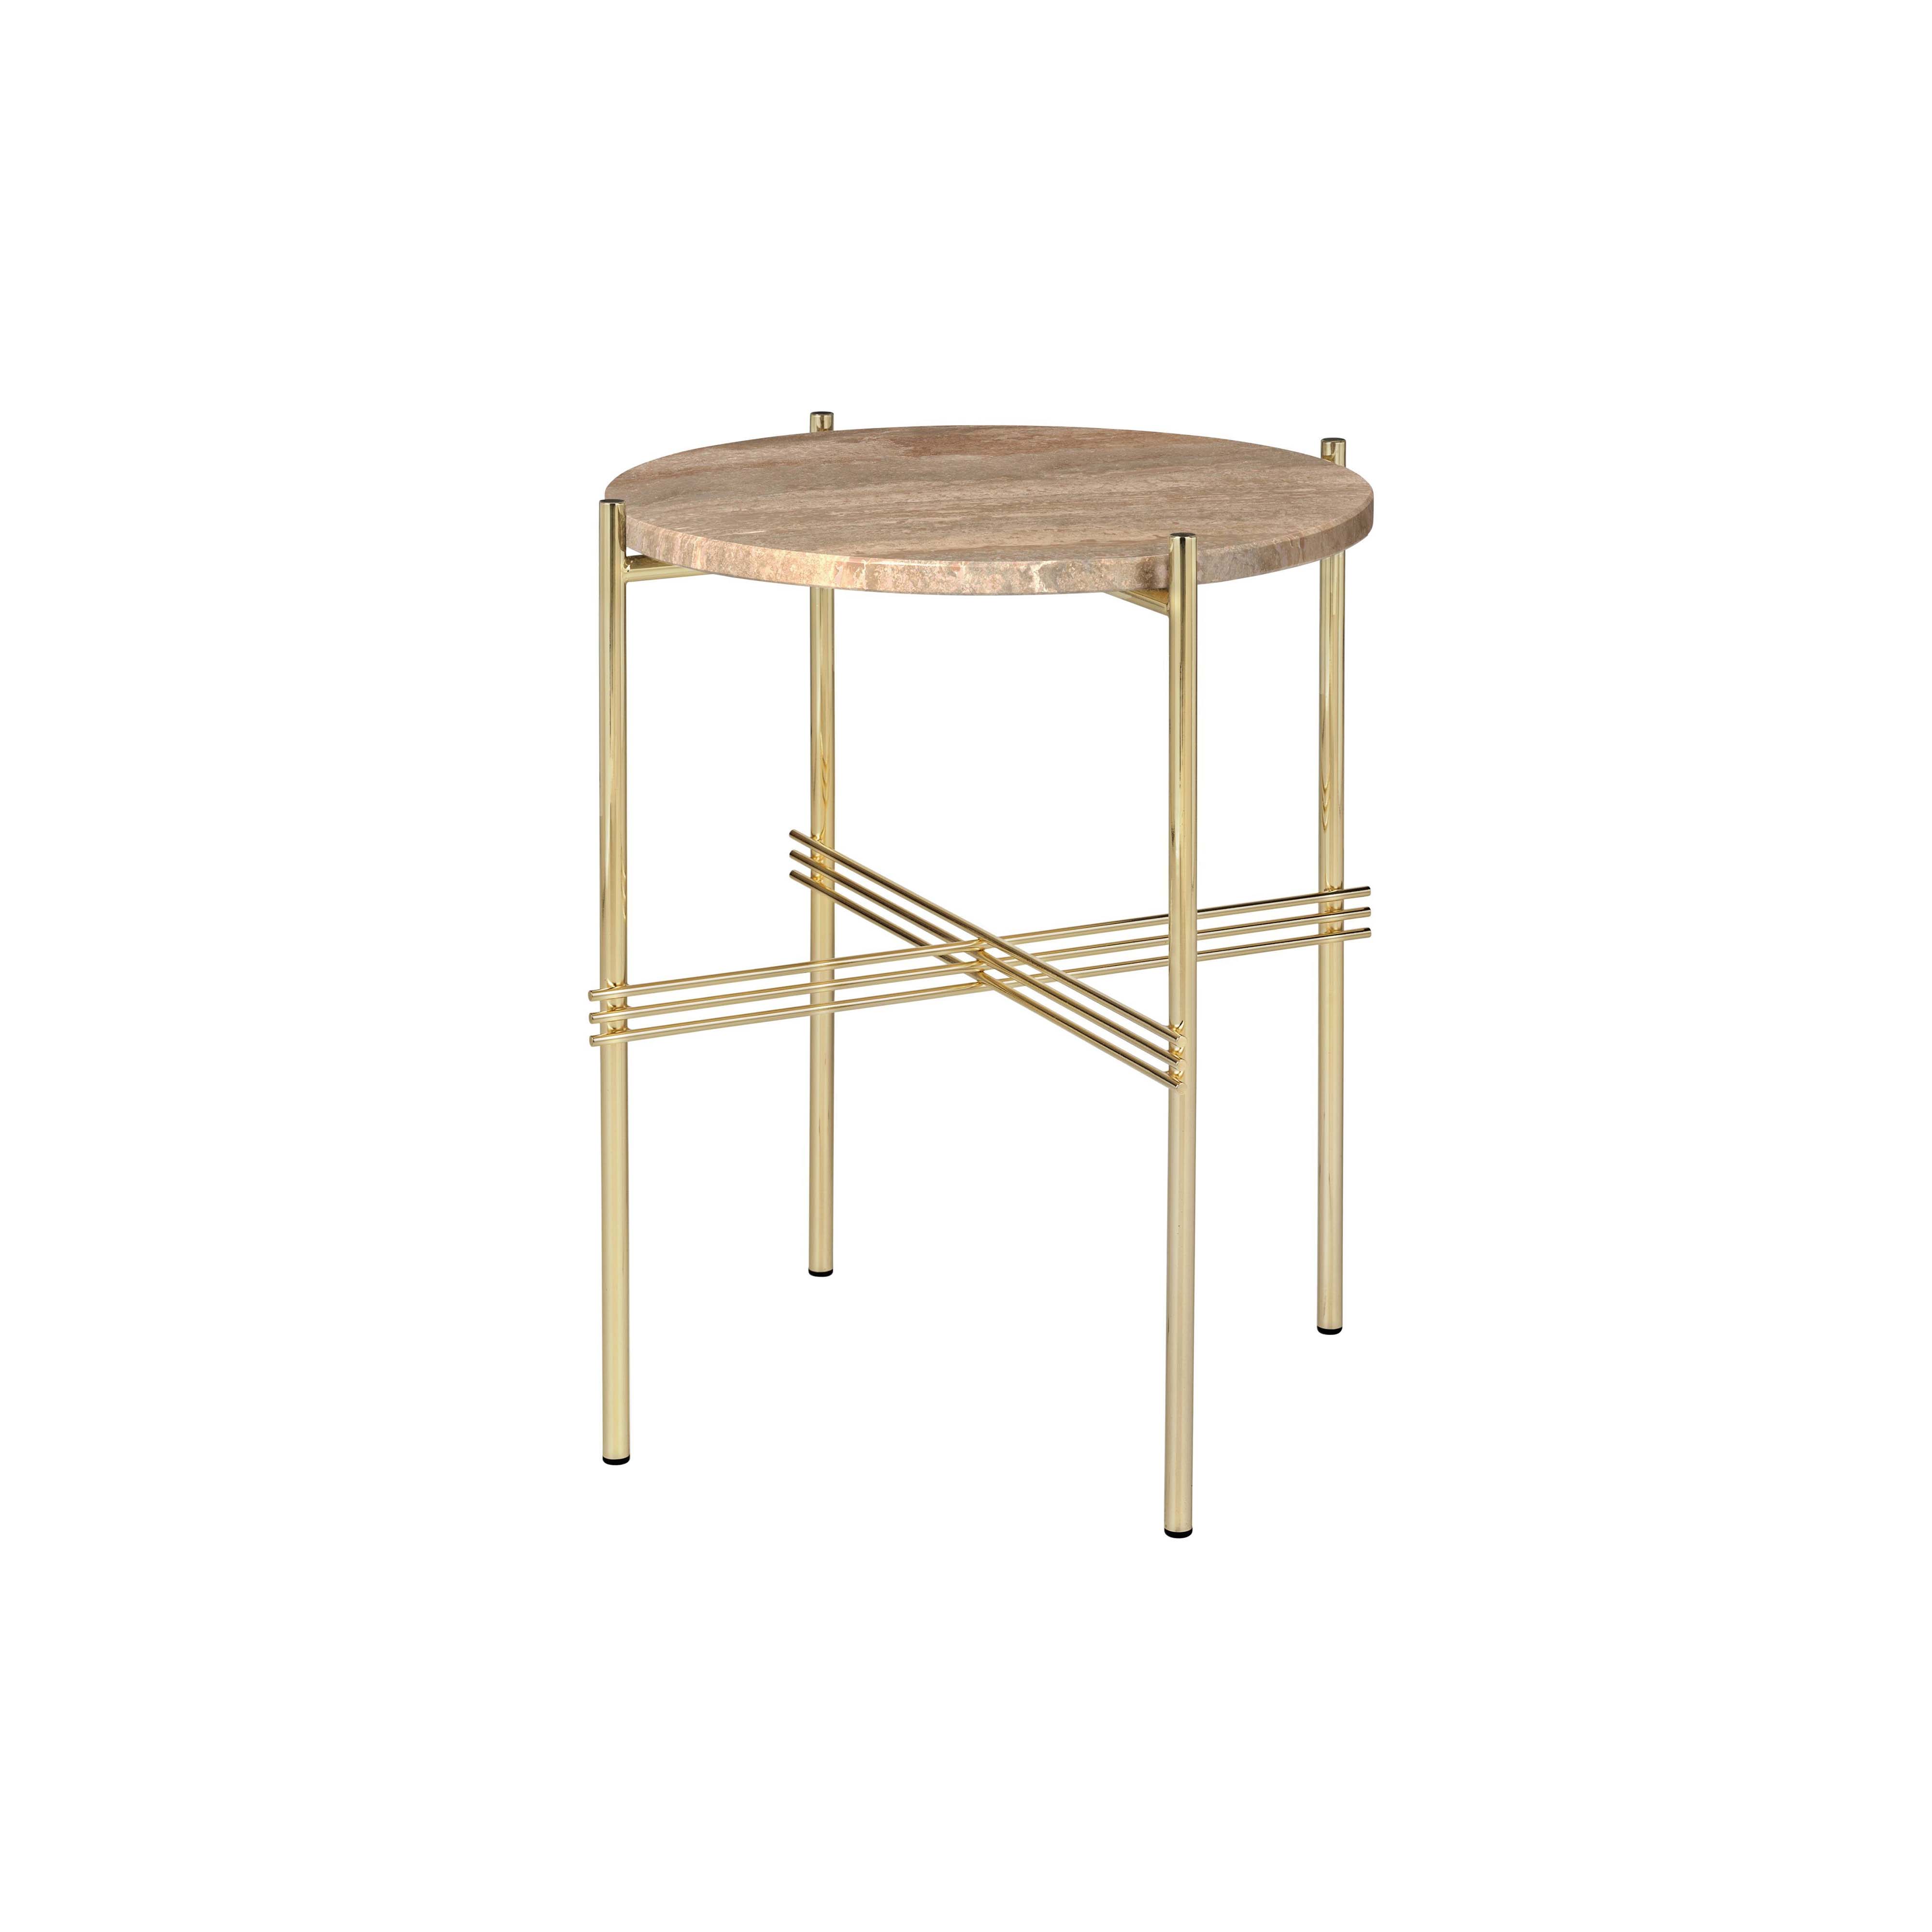 TS Round Side Table: Brass + Warm Taupe Travertine